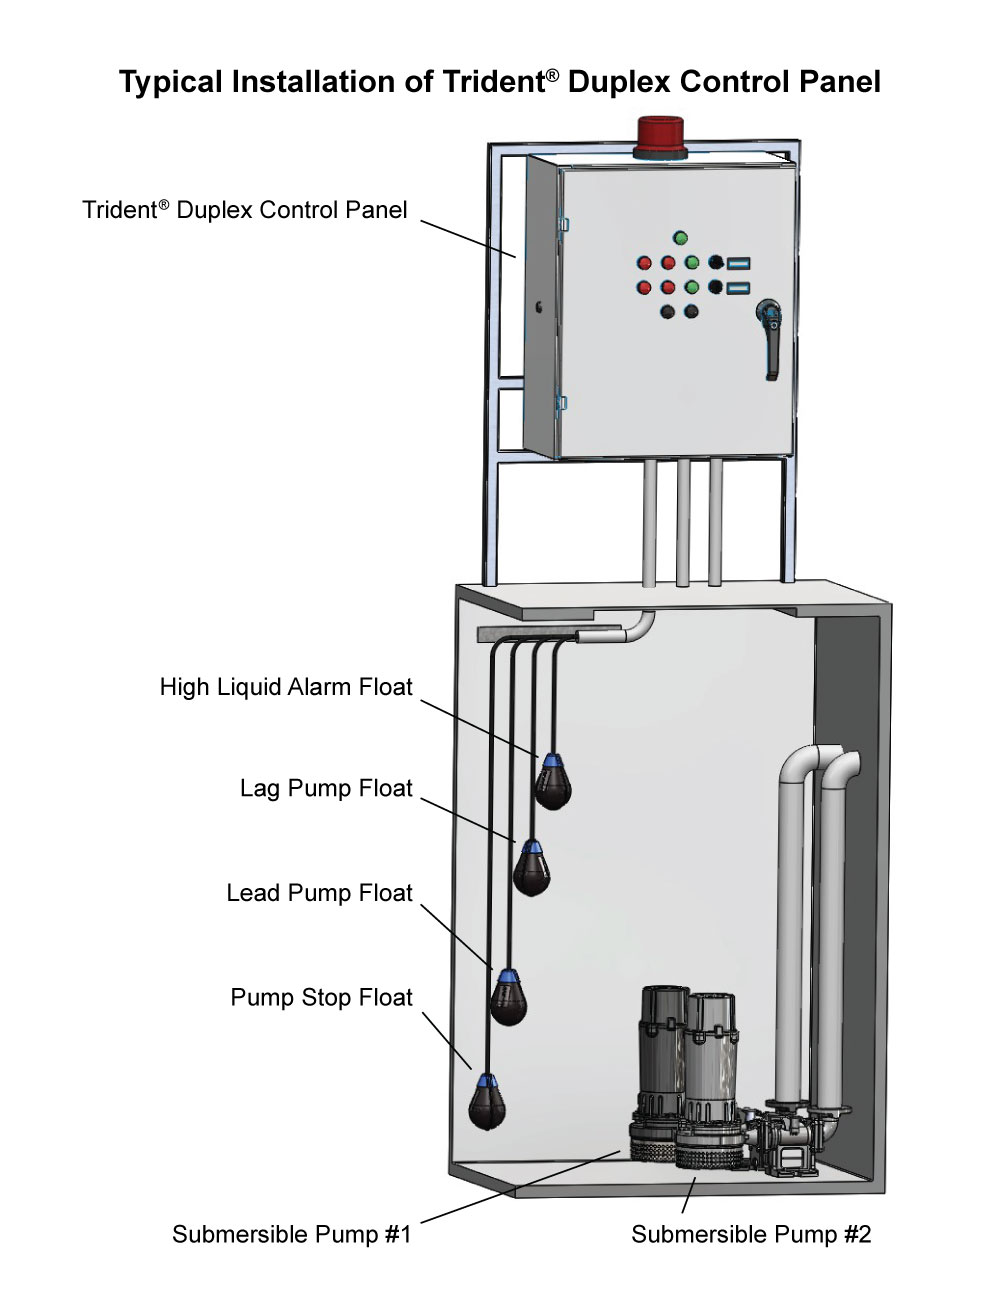 Typical Application: Trident® Industrial Control Panels